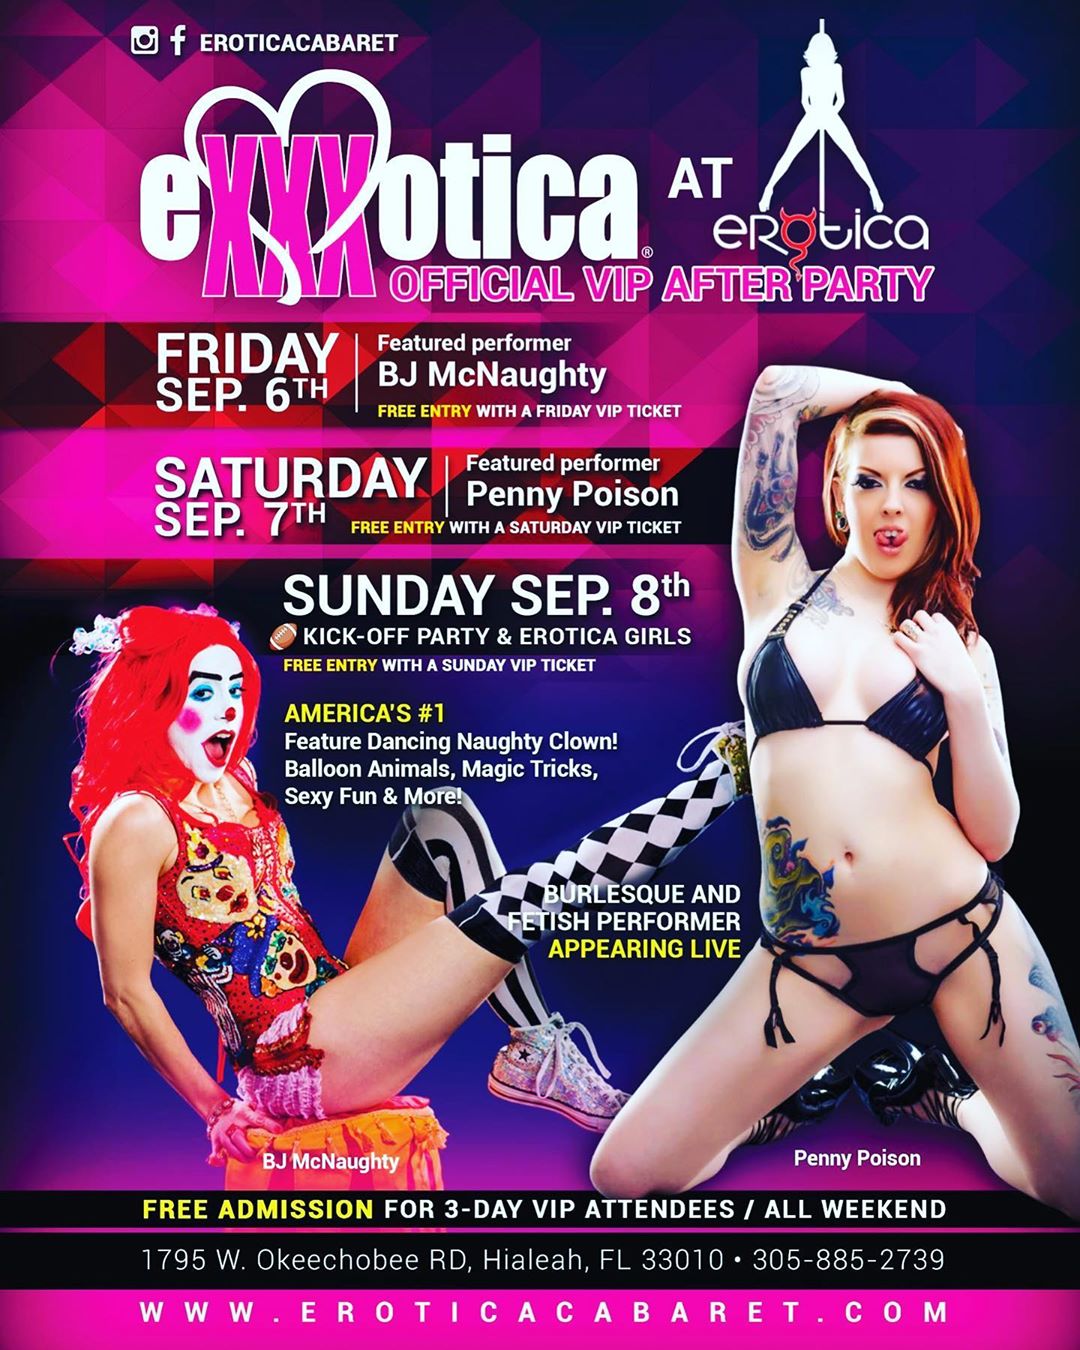 Sexy & Lusty Weekend at Erotica Cabaret, Miami-Dade, Florida, United States